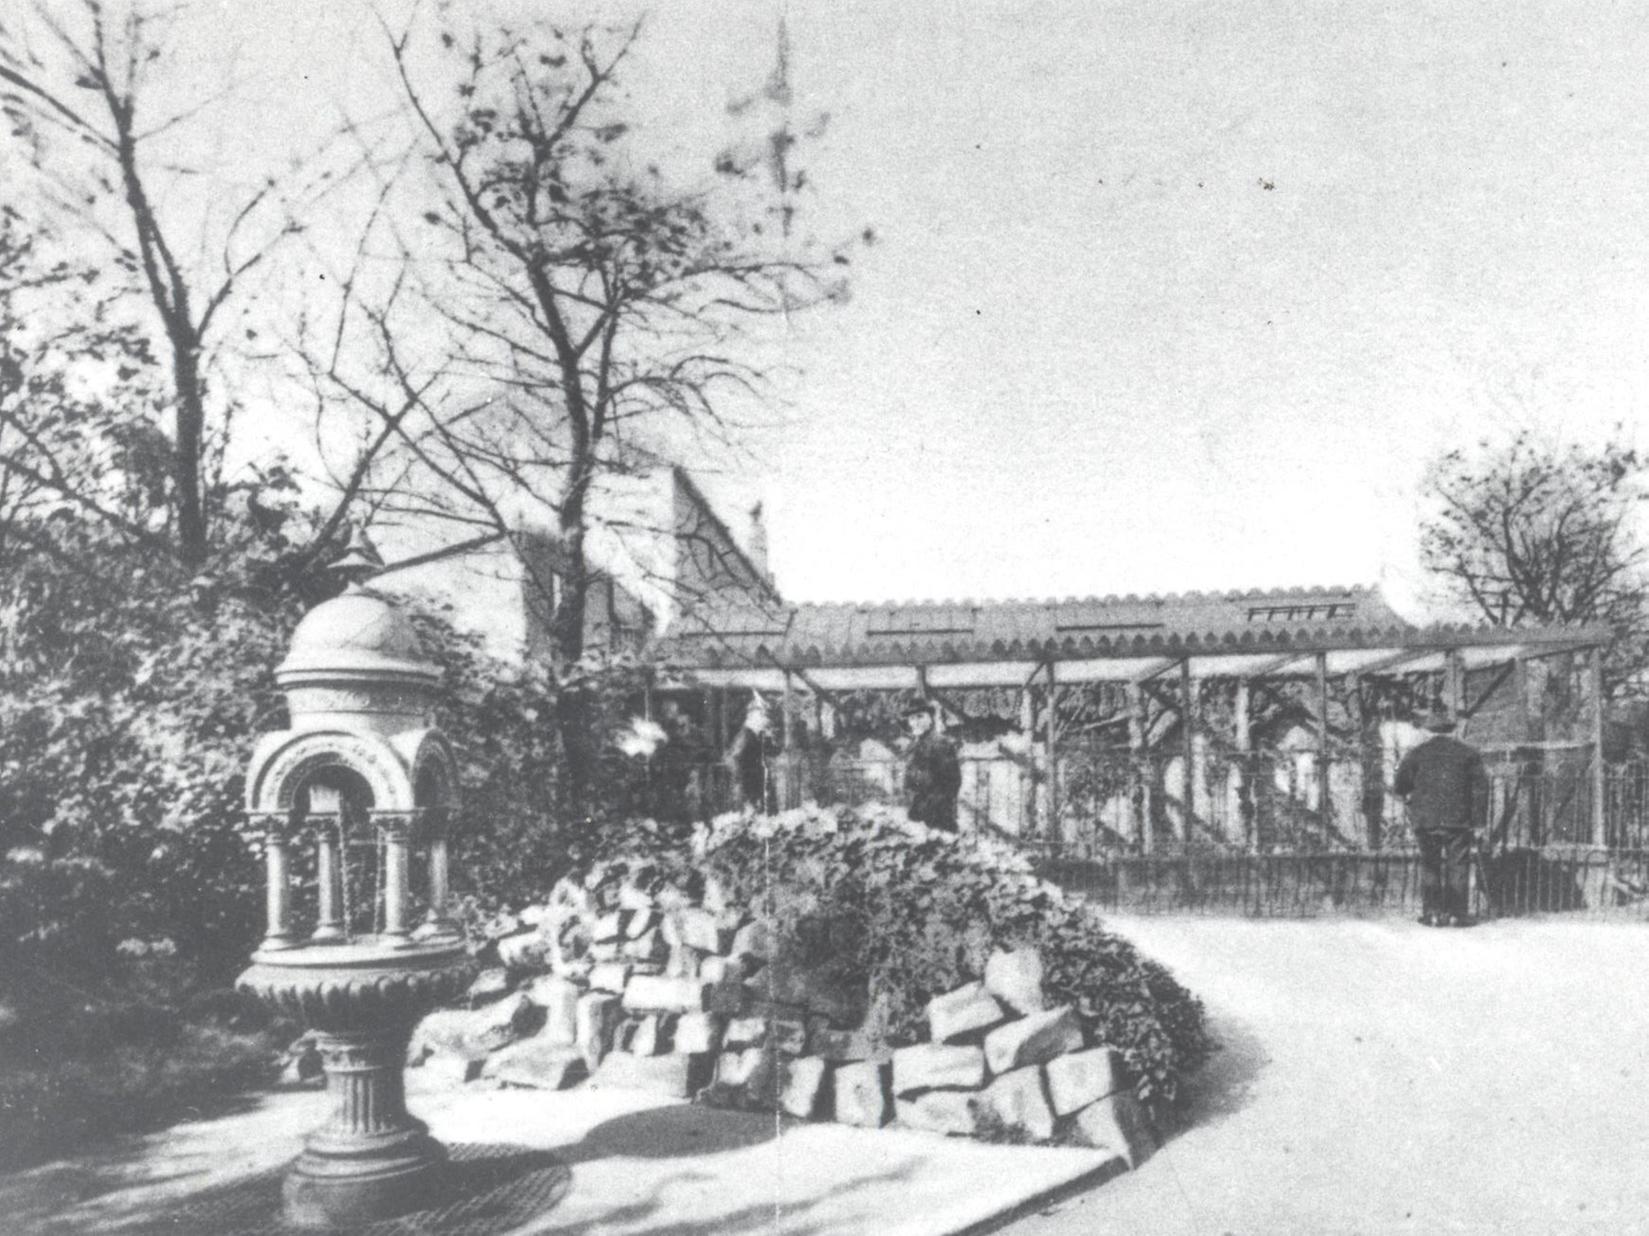 The aviary in Cross Flatts Park in the 1920s. One of the attractions was a talking parrott. On the left is the drinking fountain with its iron cup on a chain.